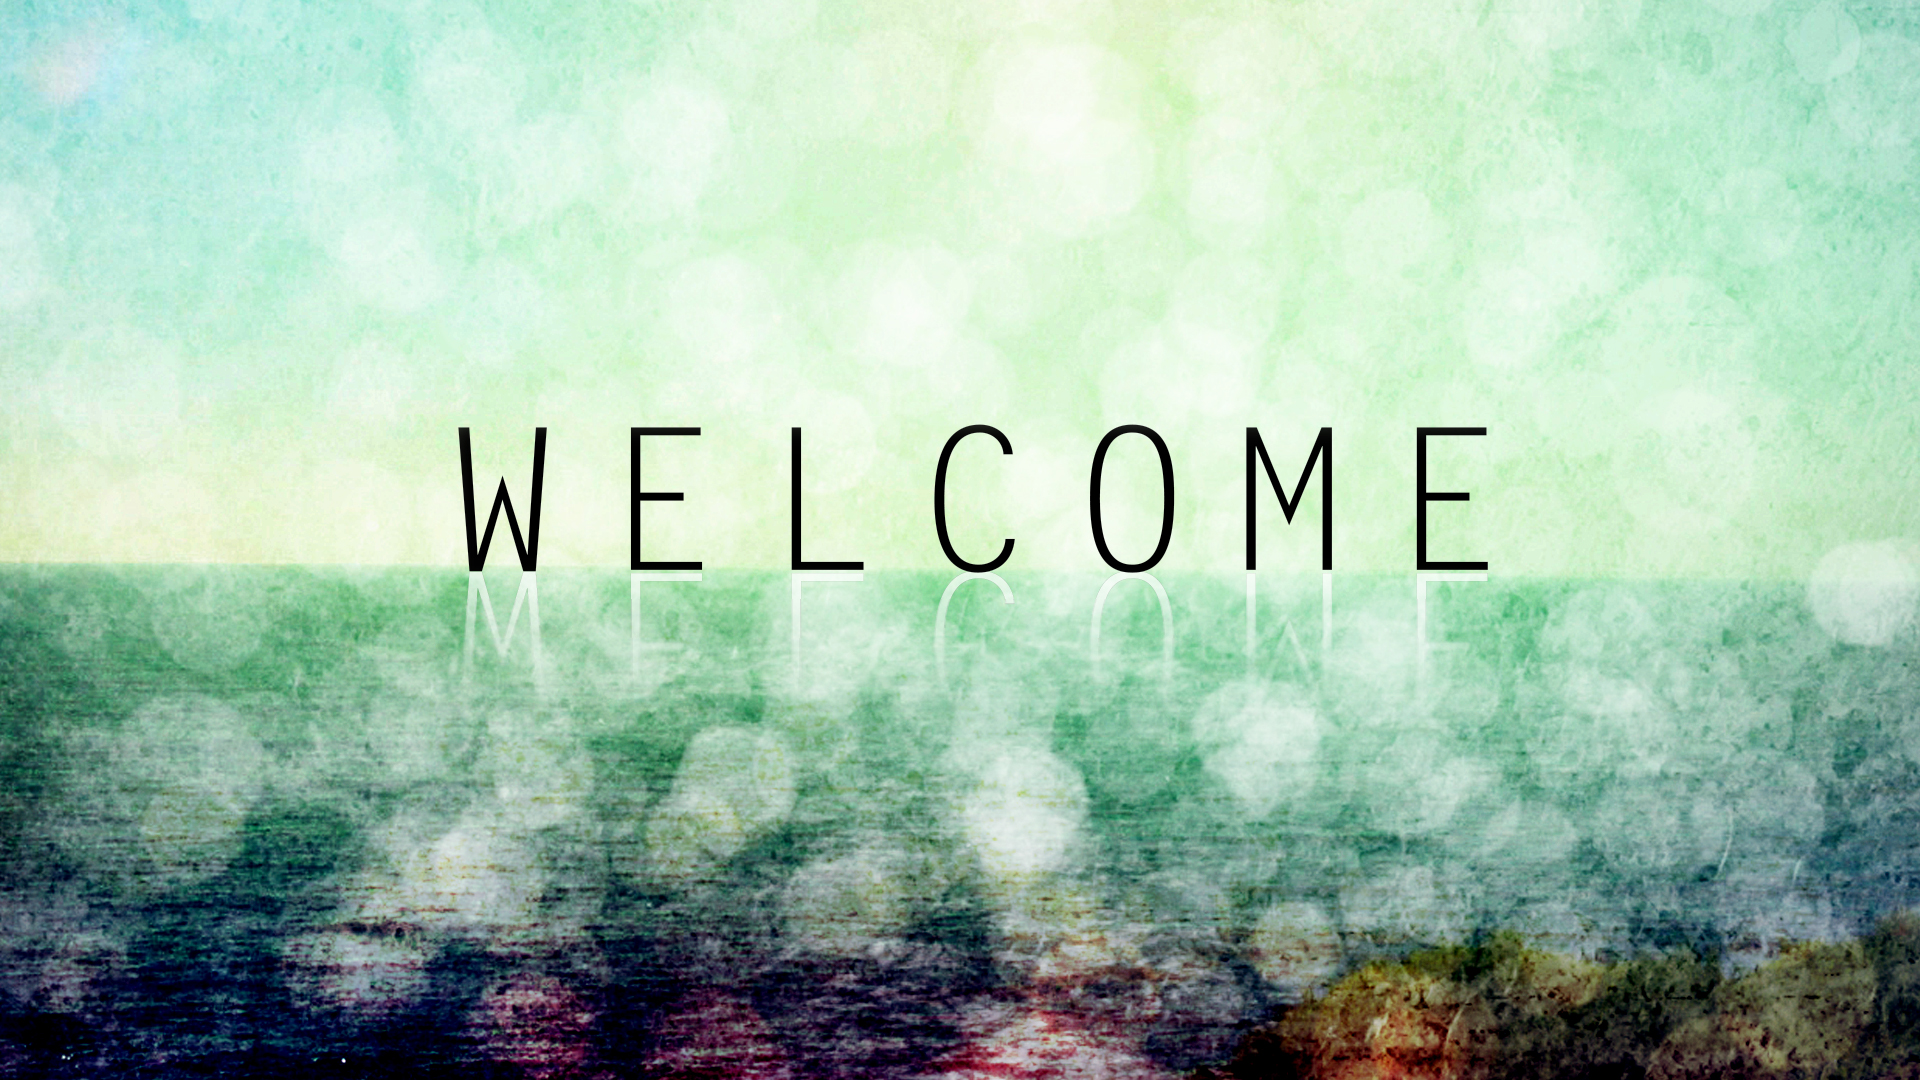 Welcoming Background. Welcoming